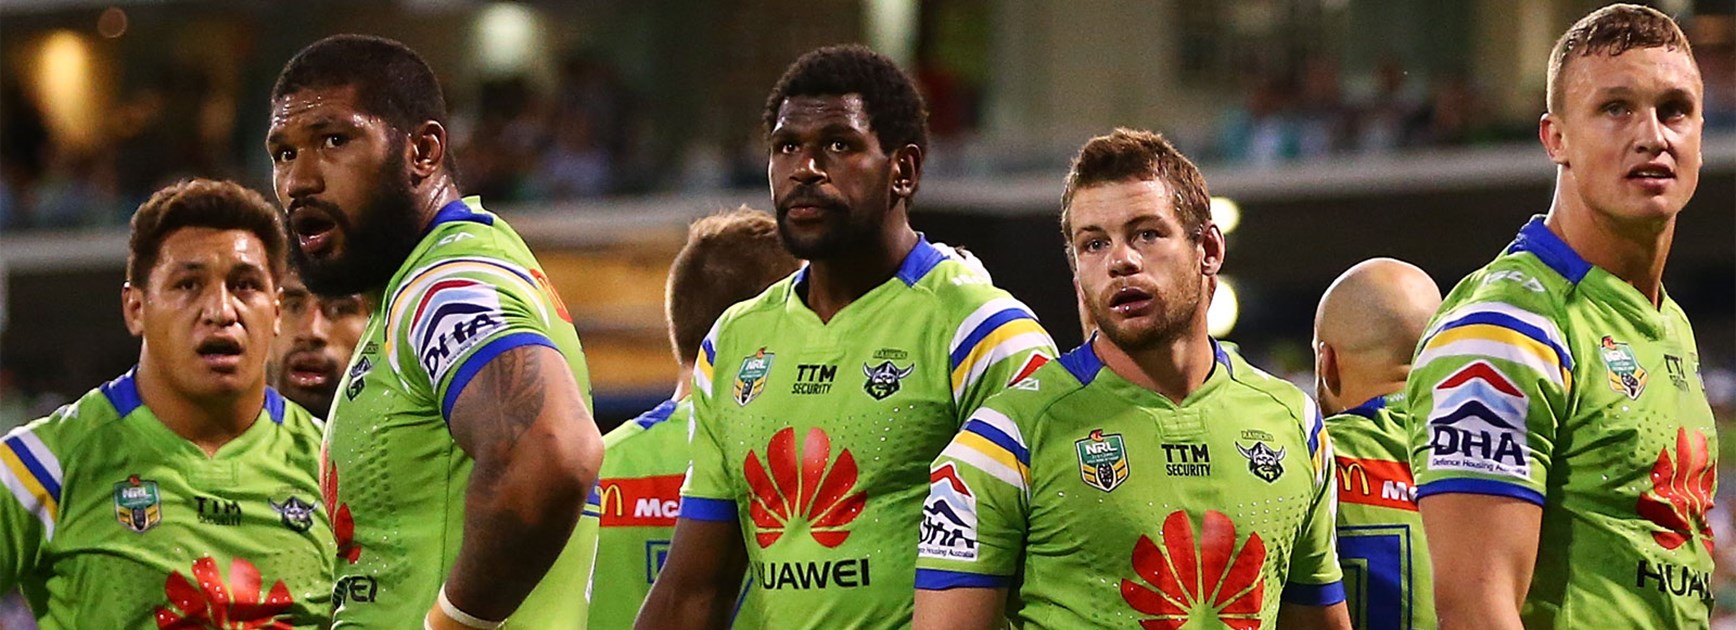 The Canberra Raiders are left stunned by the Titans' comeback win in Canberra on Saturday.